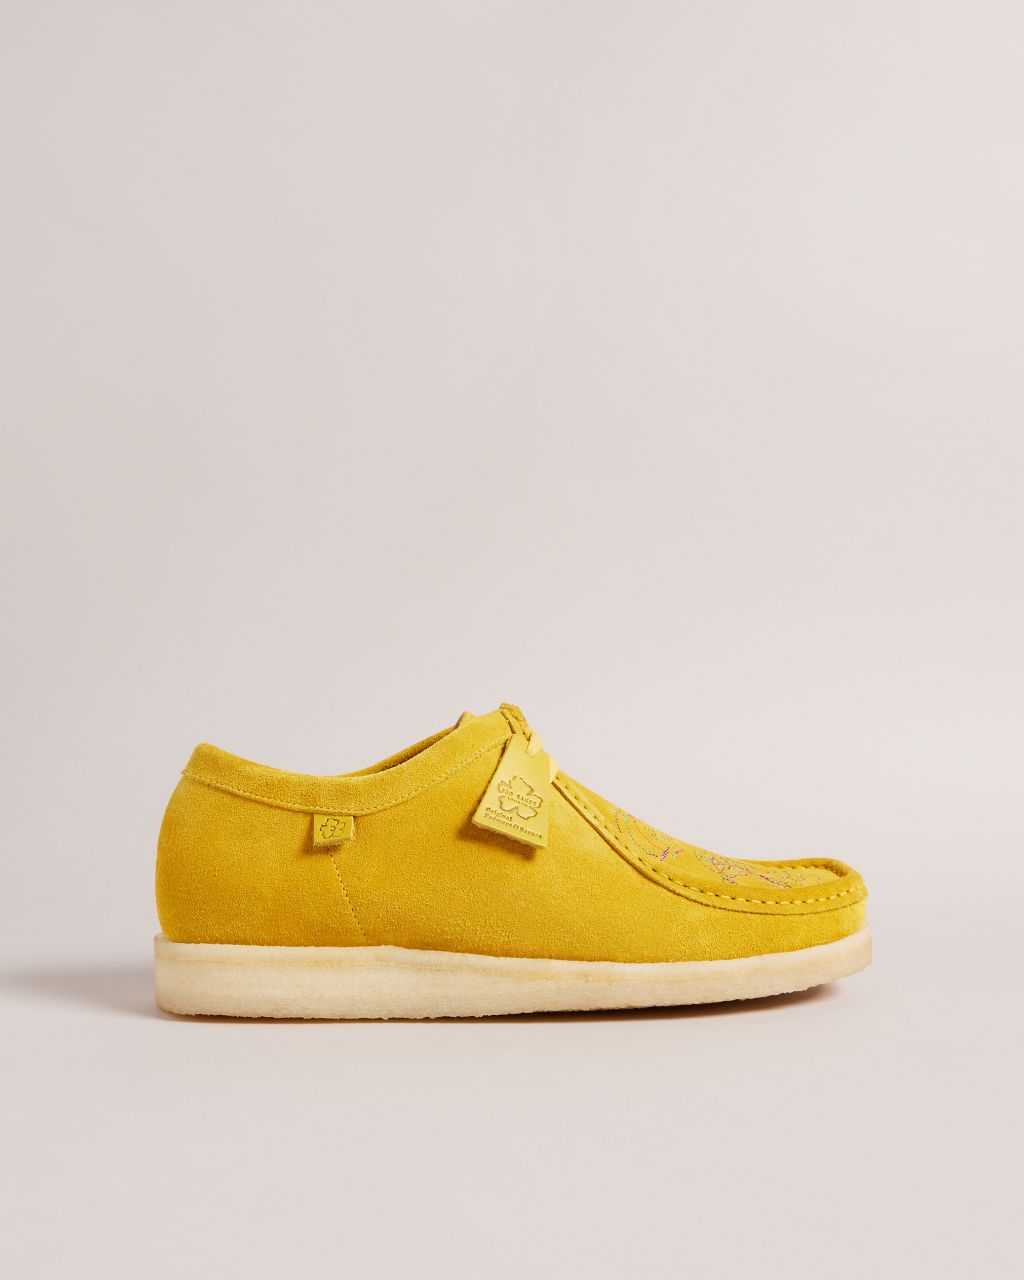 Ted Baker Men's Magnolia Embroidered Suede Shoes in Yellow, Pauul, Leather